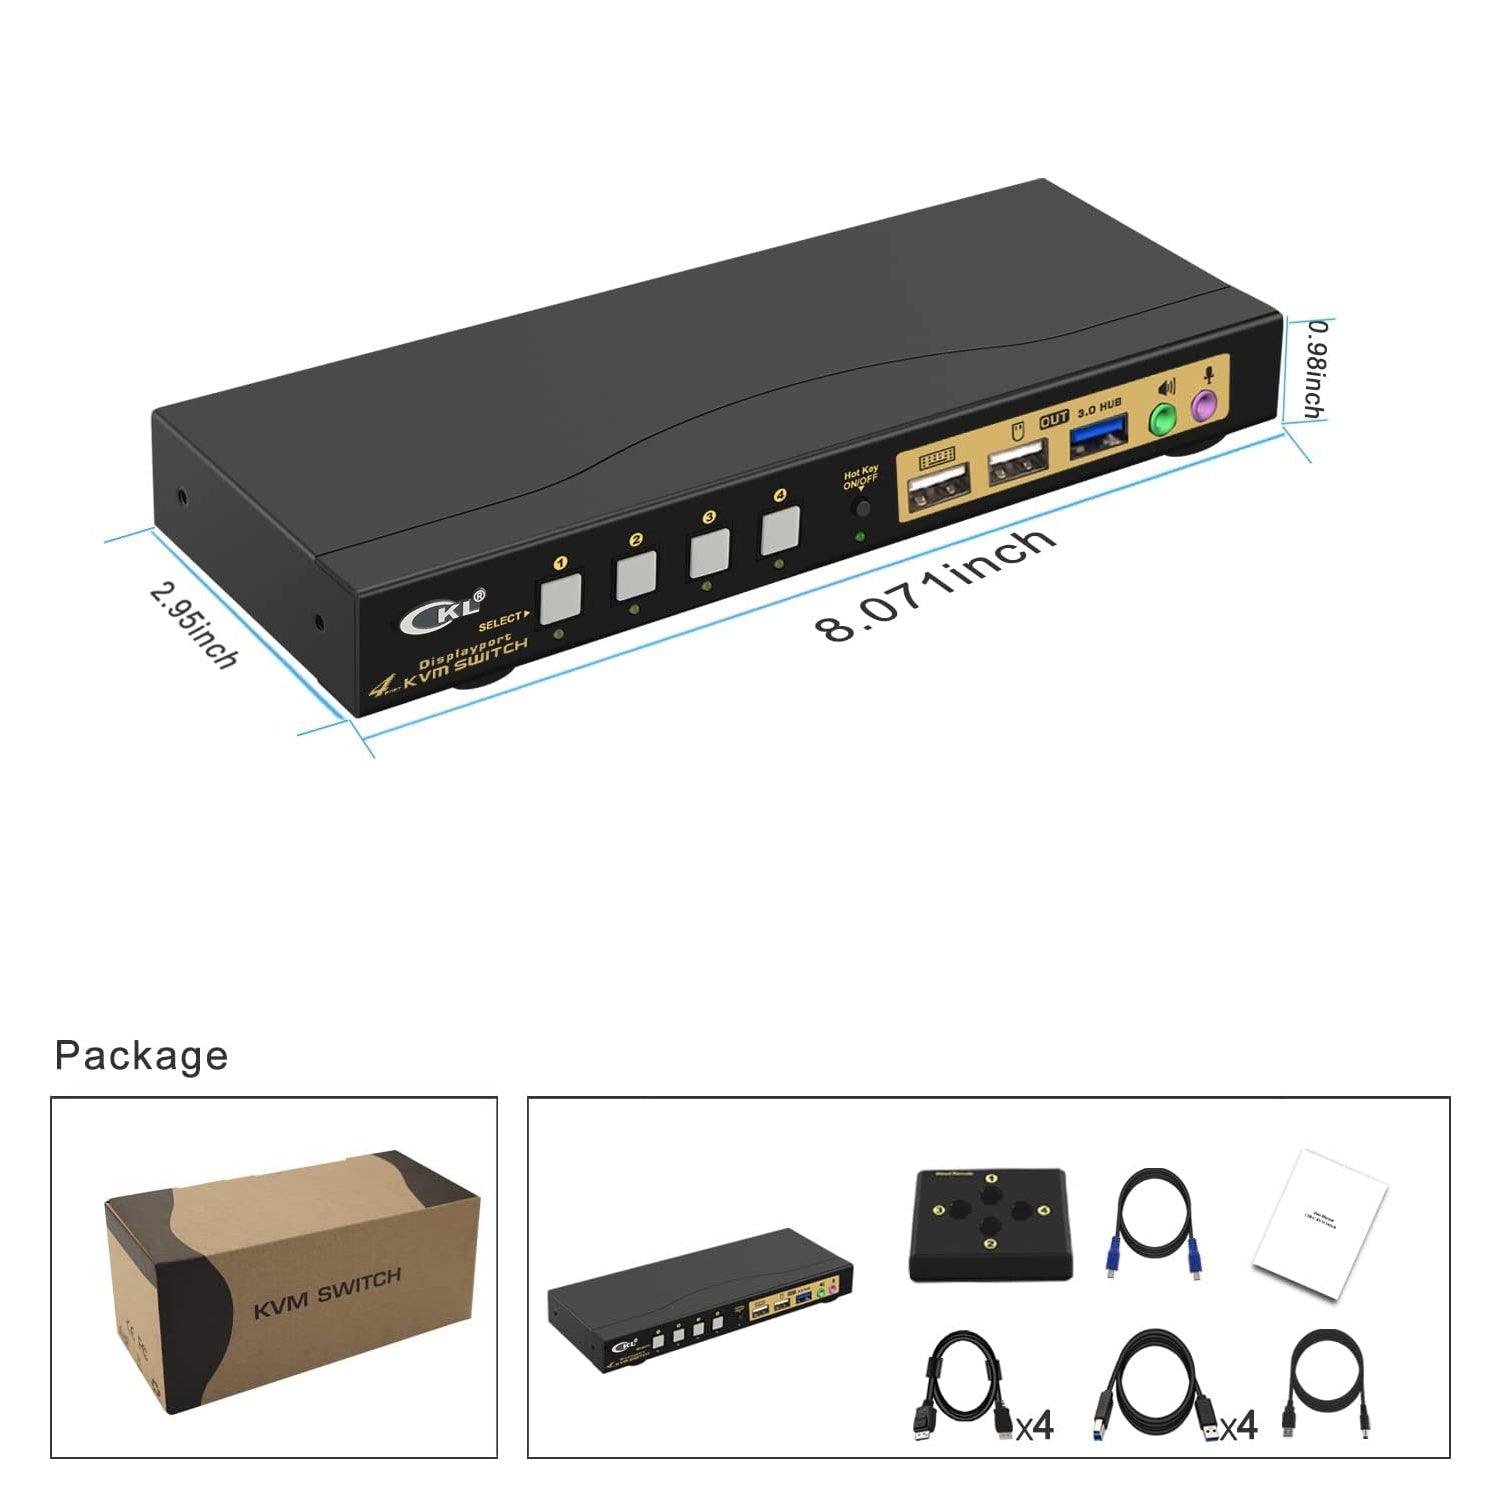 CKL 4 Port USB 3.0 KVM Switch DisplayPort 1.4 4K@144Hz 8K@30Hz for 4 Computers 1 Monitor, PC Screen Keyboard Mouse Peripheral Audio Sharing Selector Box with All Cables (64DP-4) - CKL KVM Switches